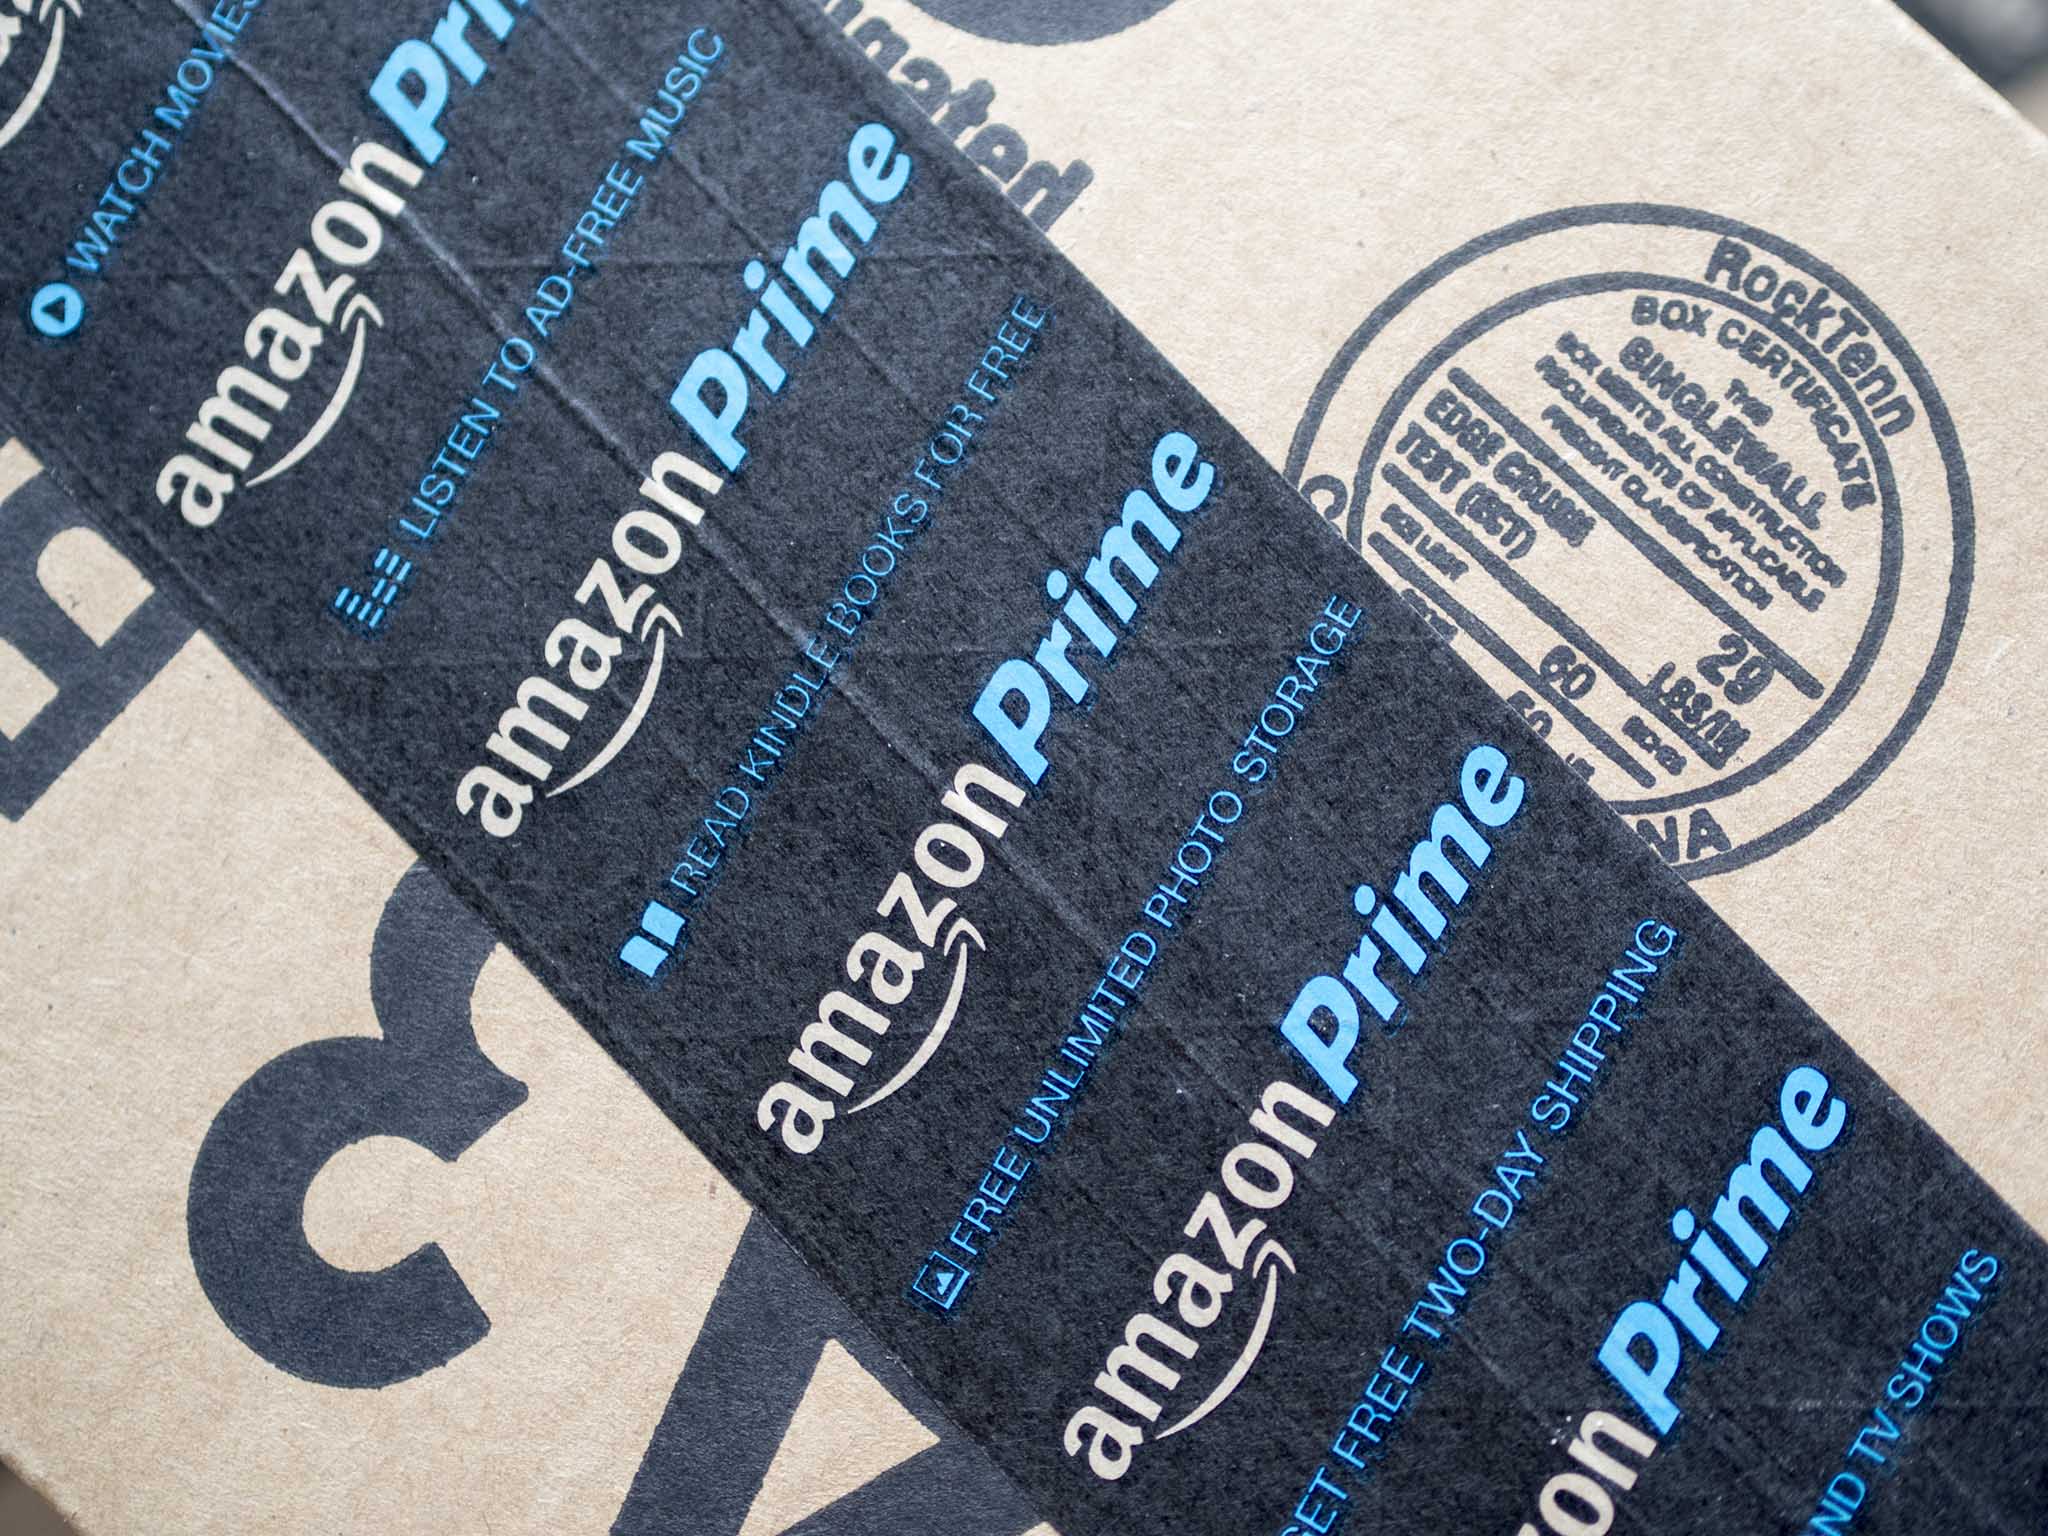 Prime members can save 20% off Amazon Warehouse deals today